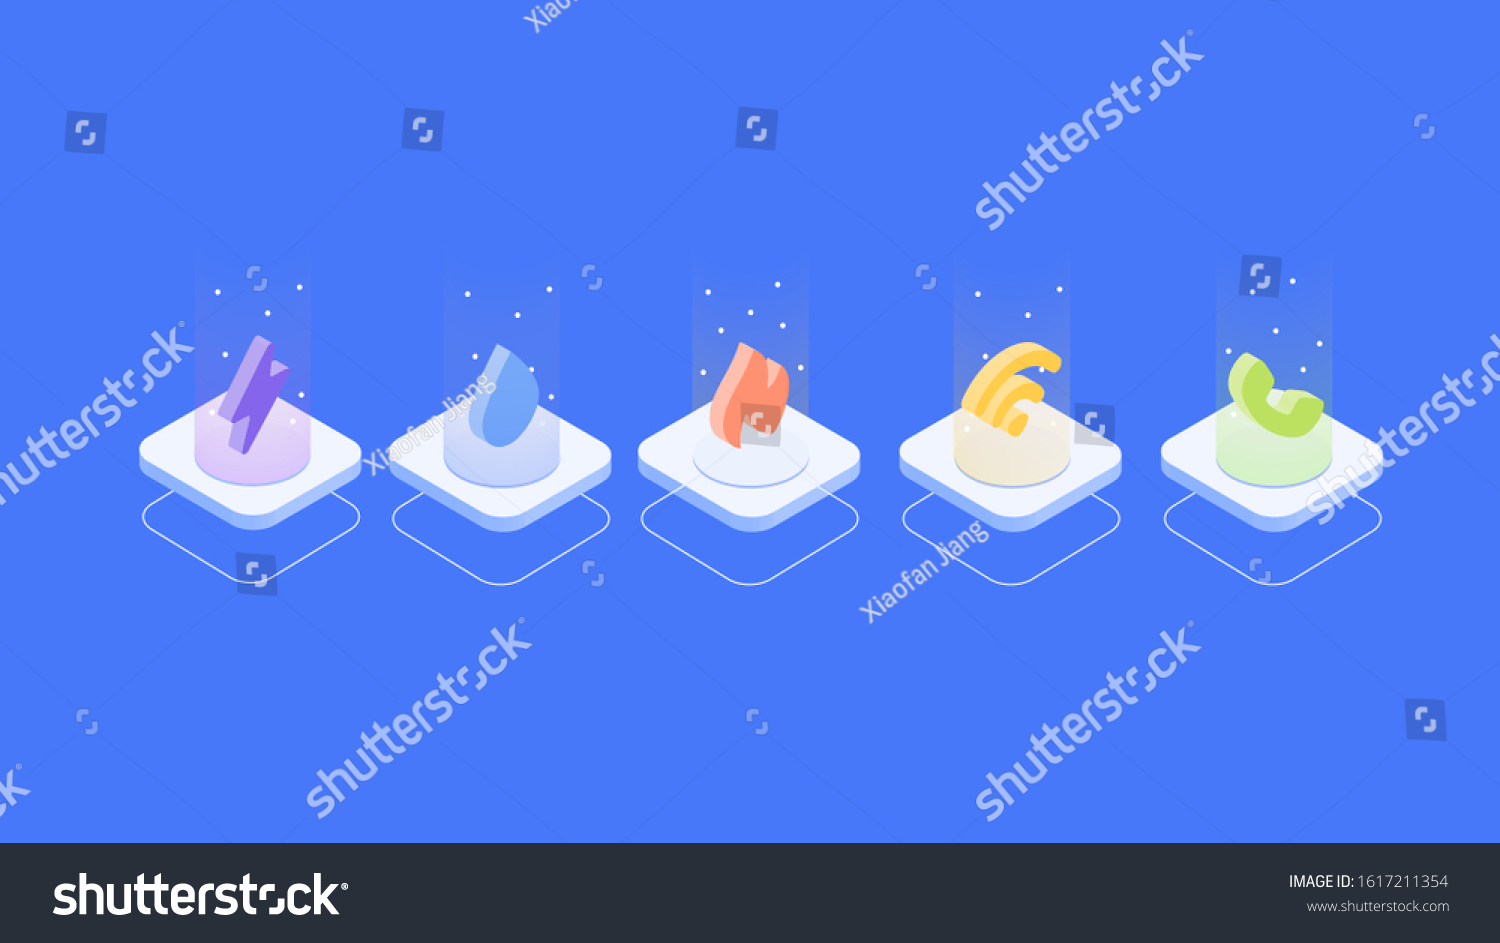 SVG of A set of isometric gradient utility deals icon illustration, utilities bundle, including electricity power, water, gas, wifi/ cable, telephone bill, 2.5D svg